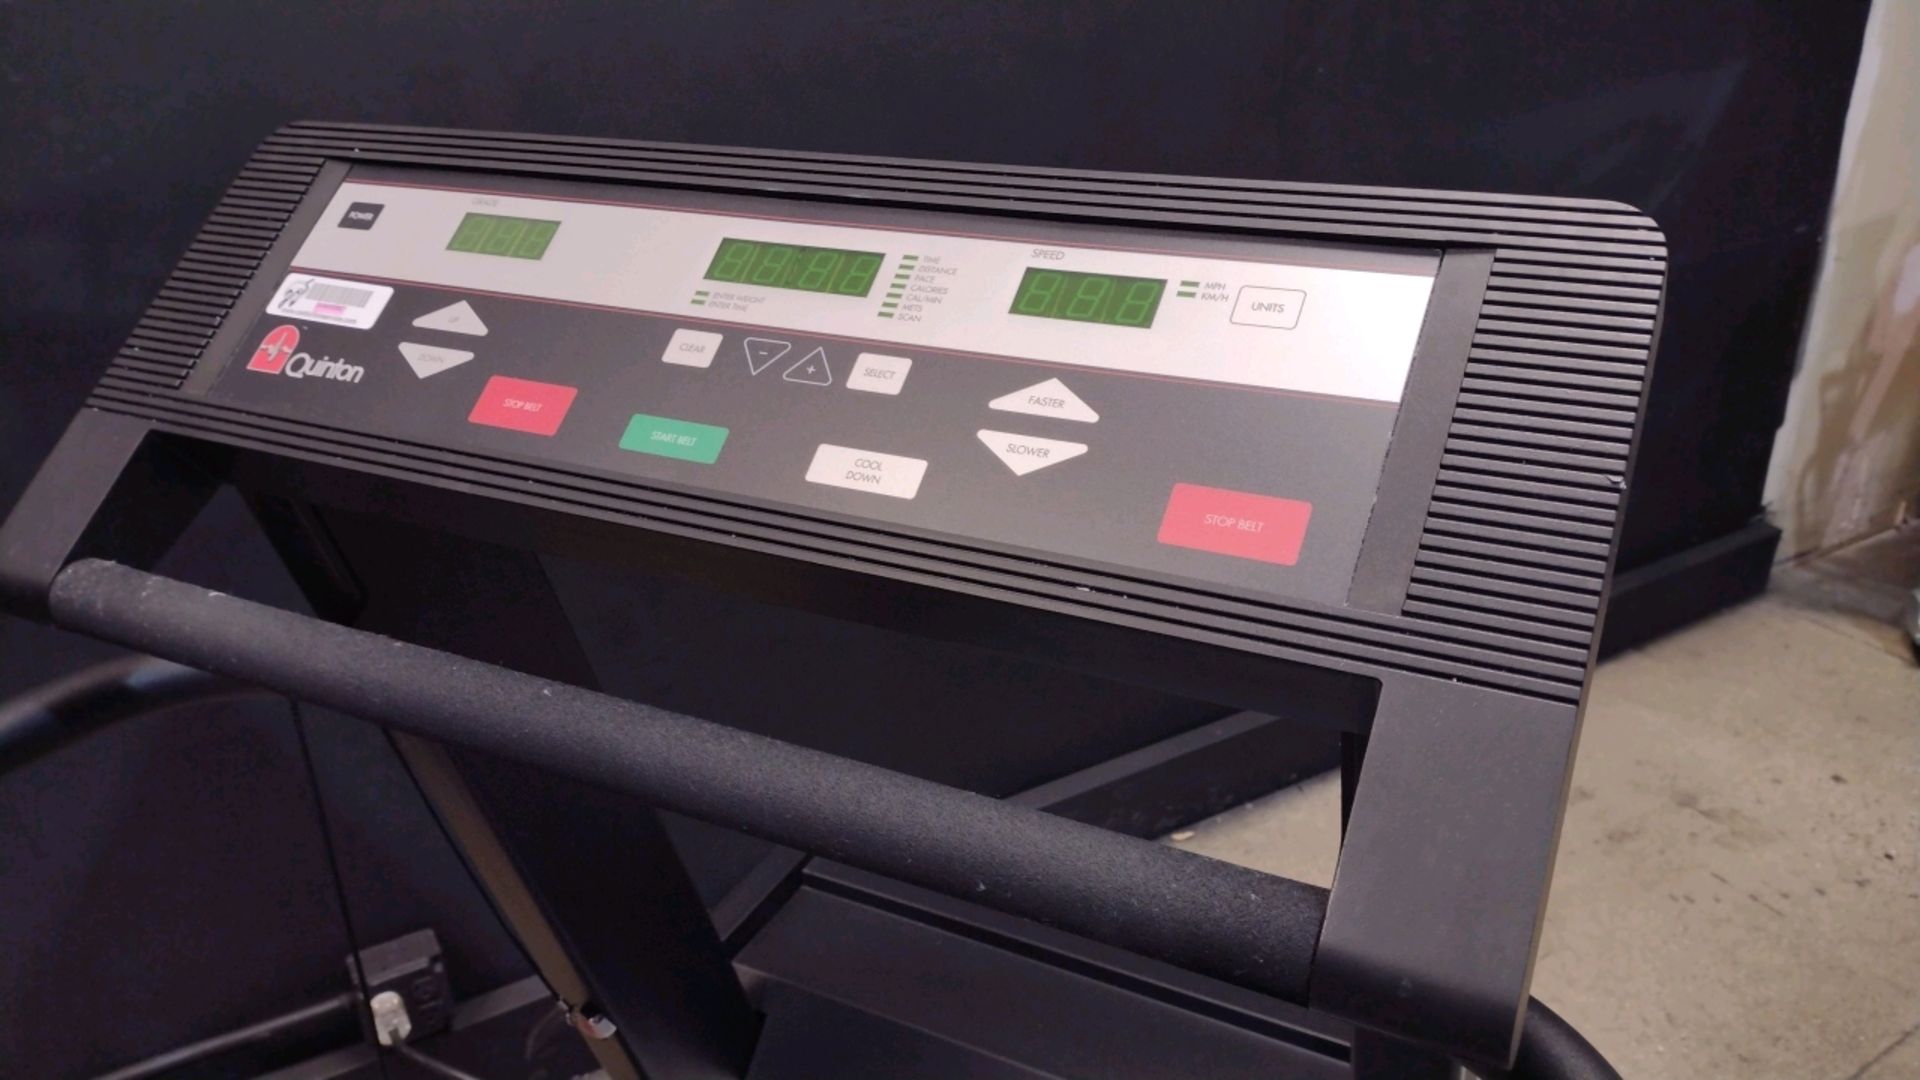 QUINTON MEDTRACK CR60 TREADMILL (LOCATED AT 3325 MOUNT PROSPECT ROAD, FRANKLIN PARK, IL, 60131) - Image 2 of 2